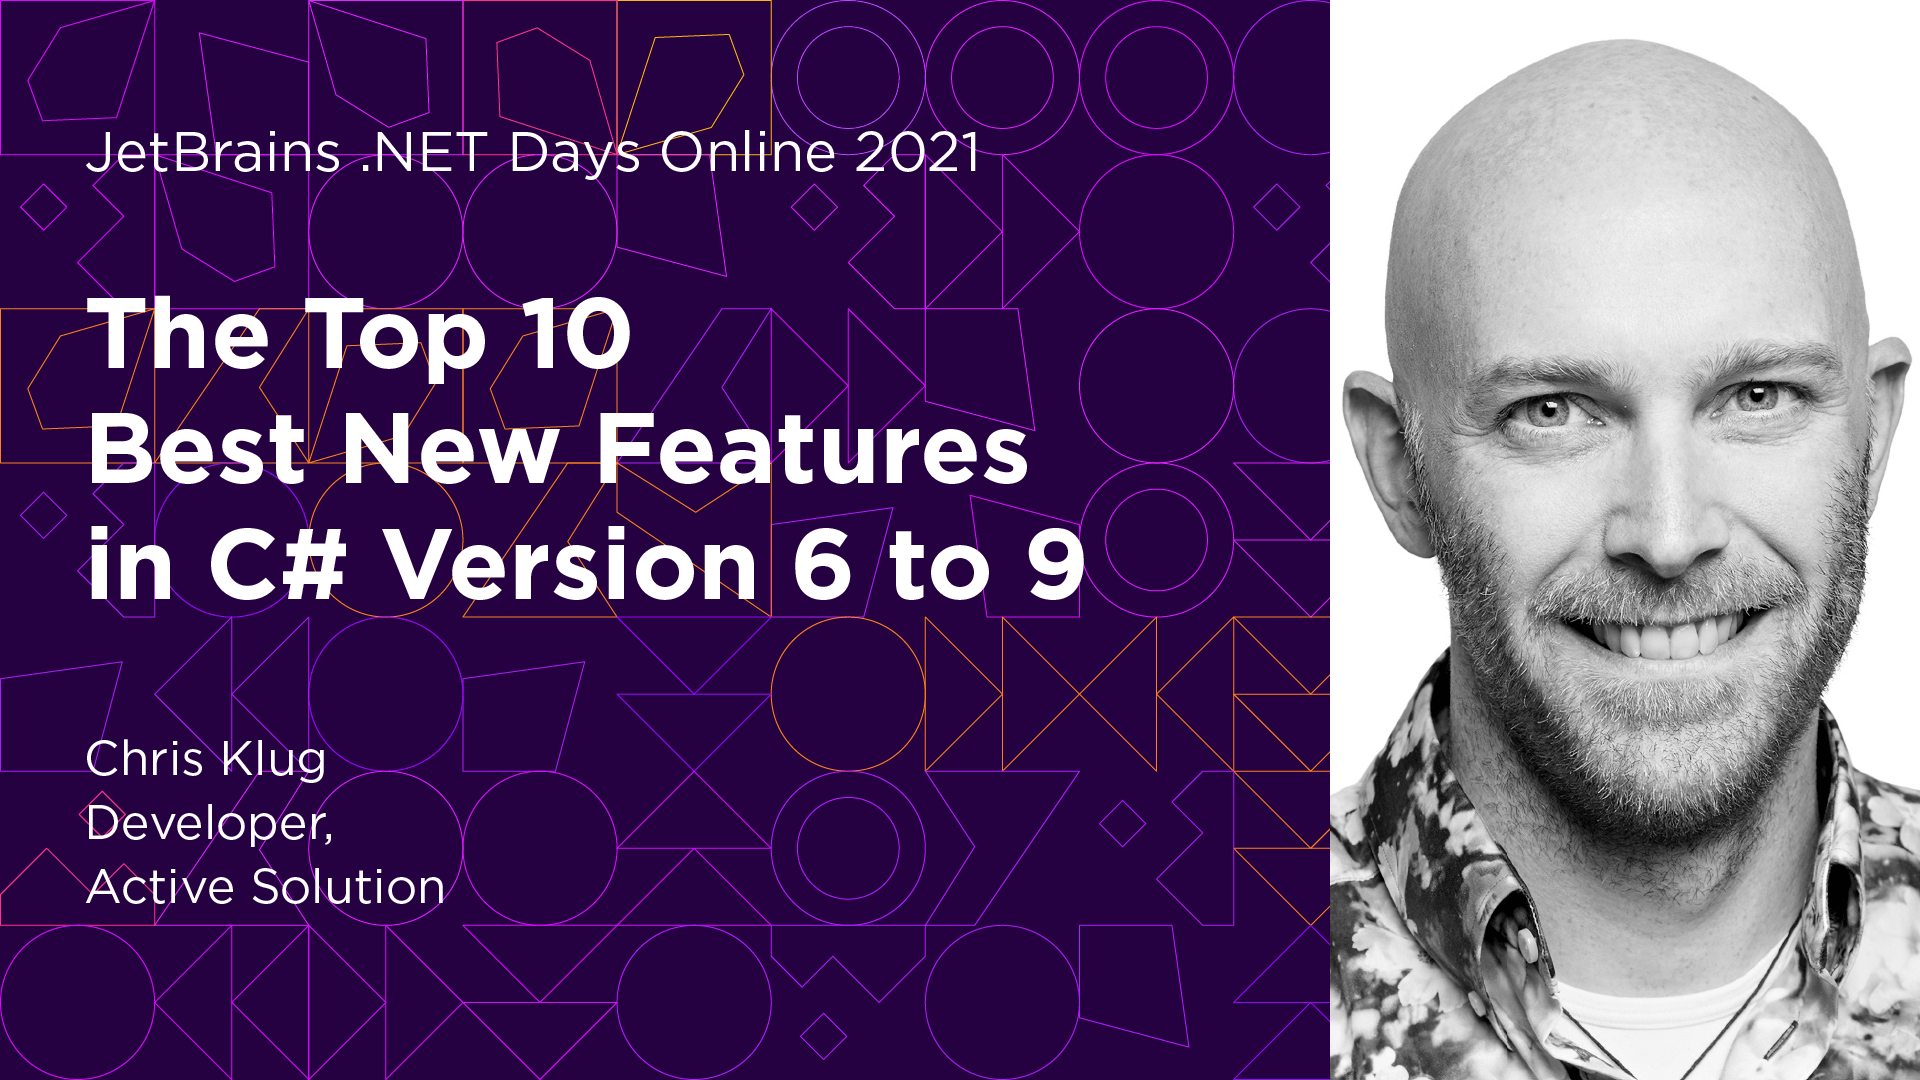 The Top 10 Best New Features in C# Version 6 to 9